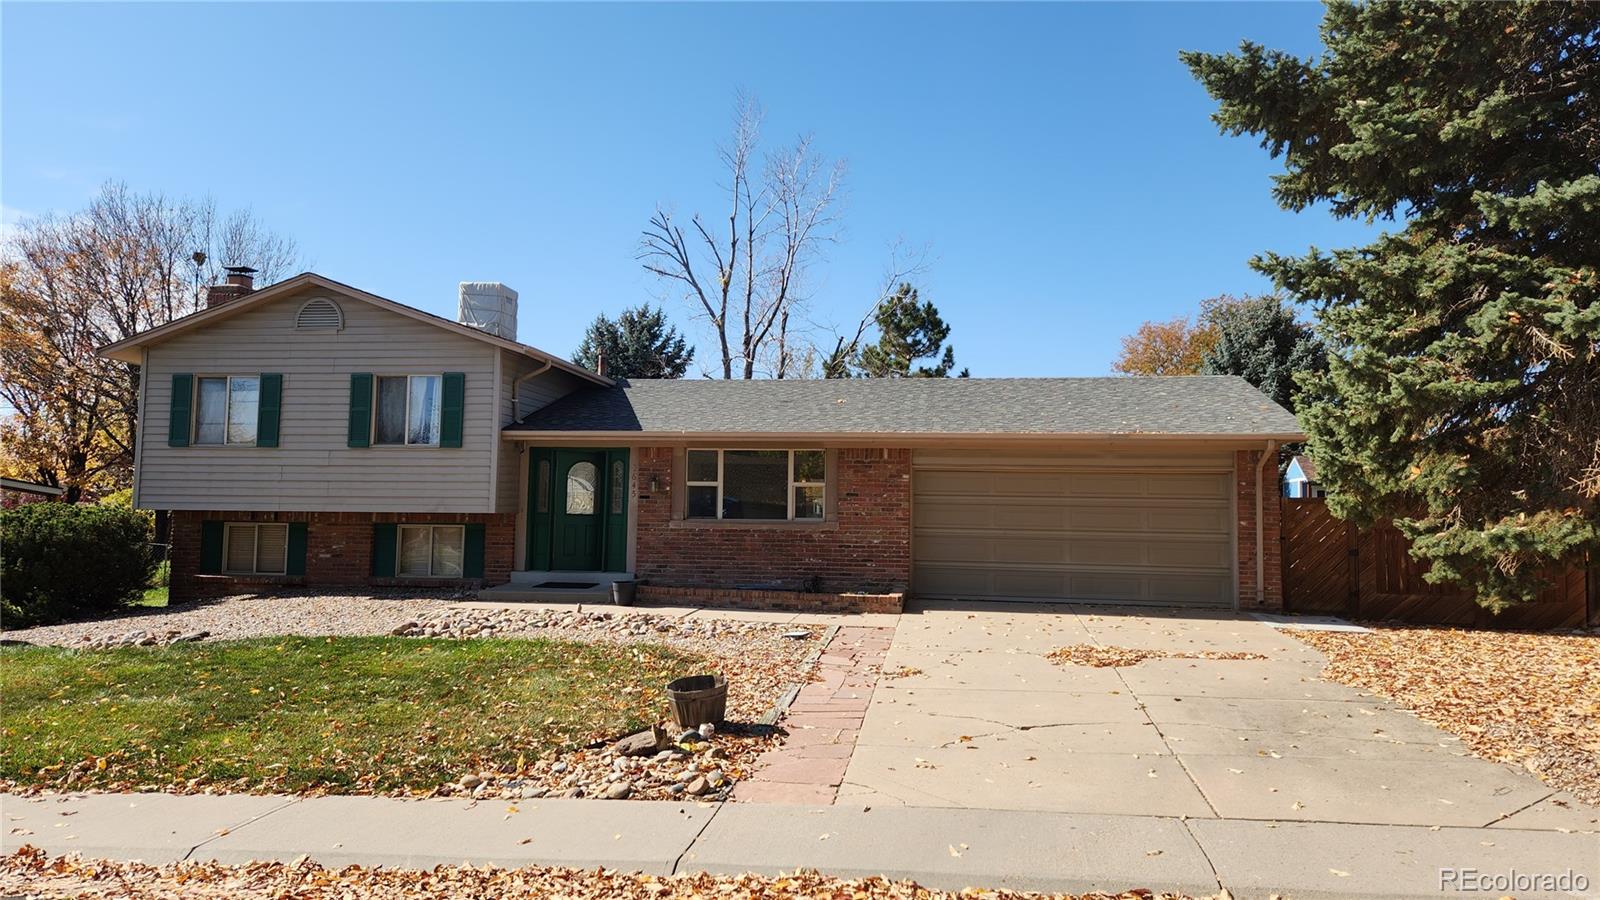 3645 E 128th Place, thornton MLS: 7494302 Beds: 4 Baths: 2 Price: $479,000